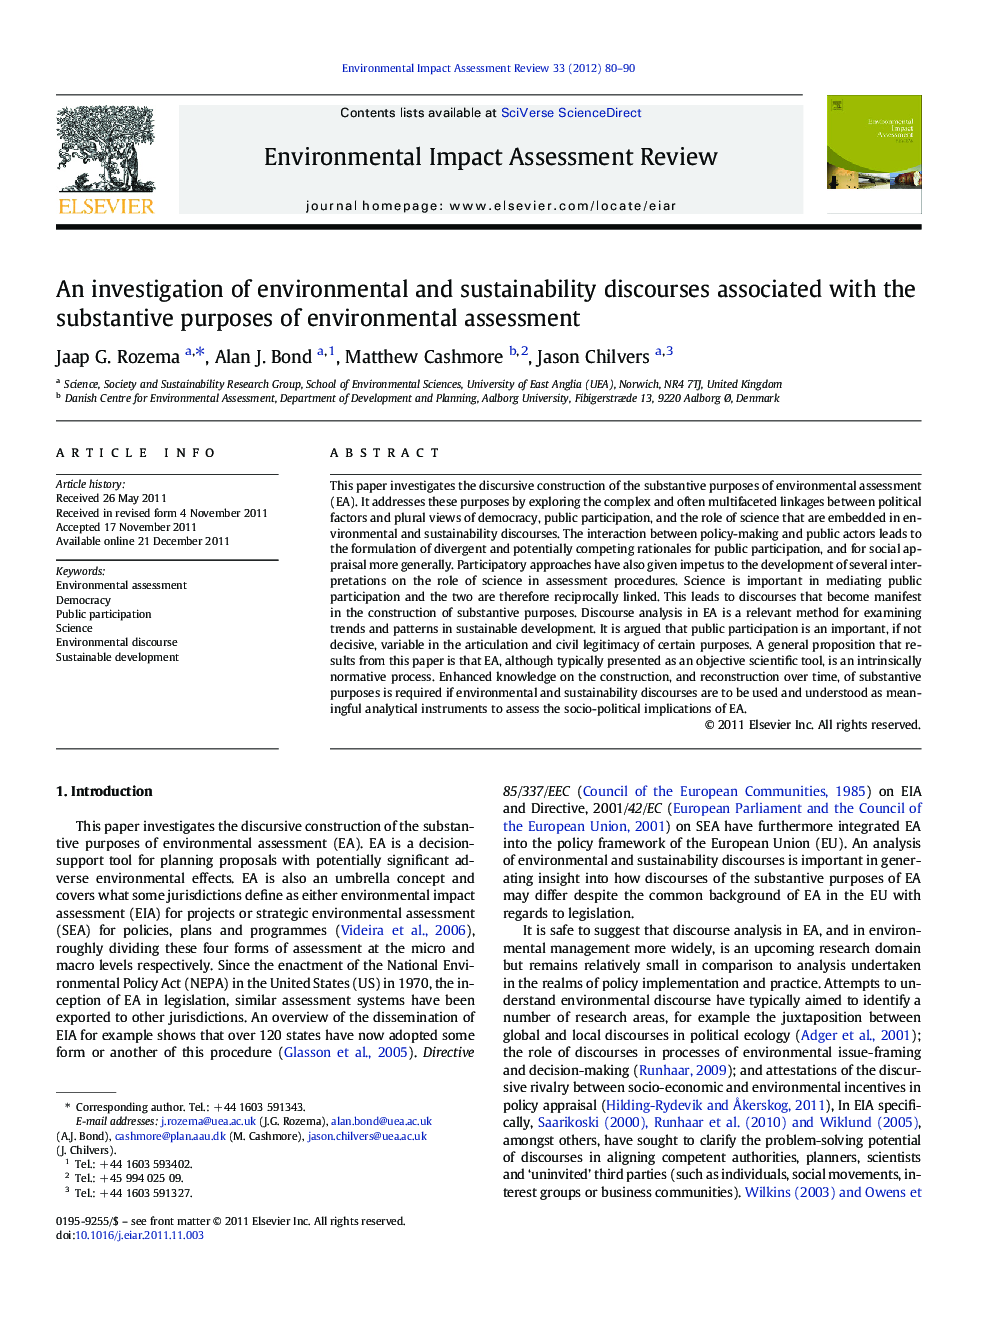 An investigation of environmental and sustainability discourses associated with the substantive purposes of environmental assessment